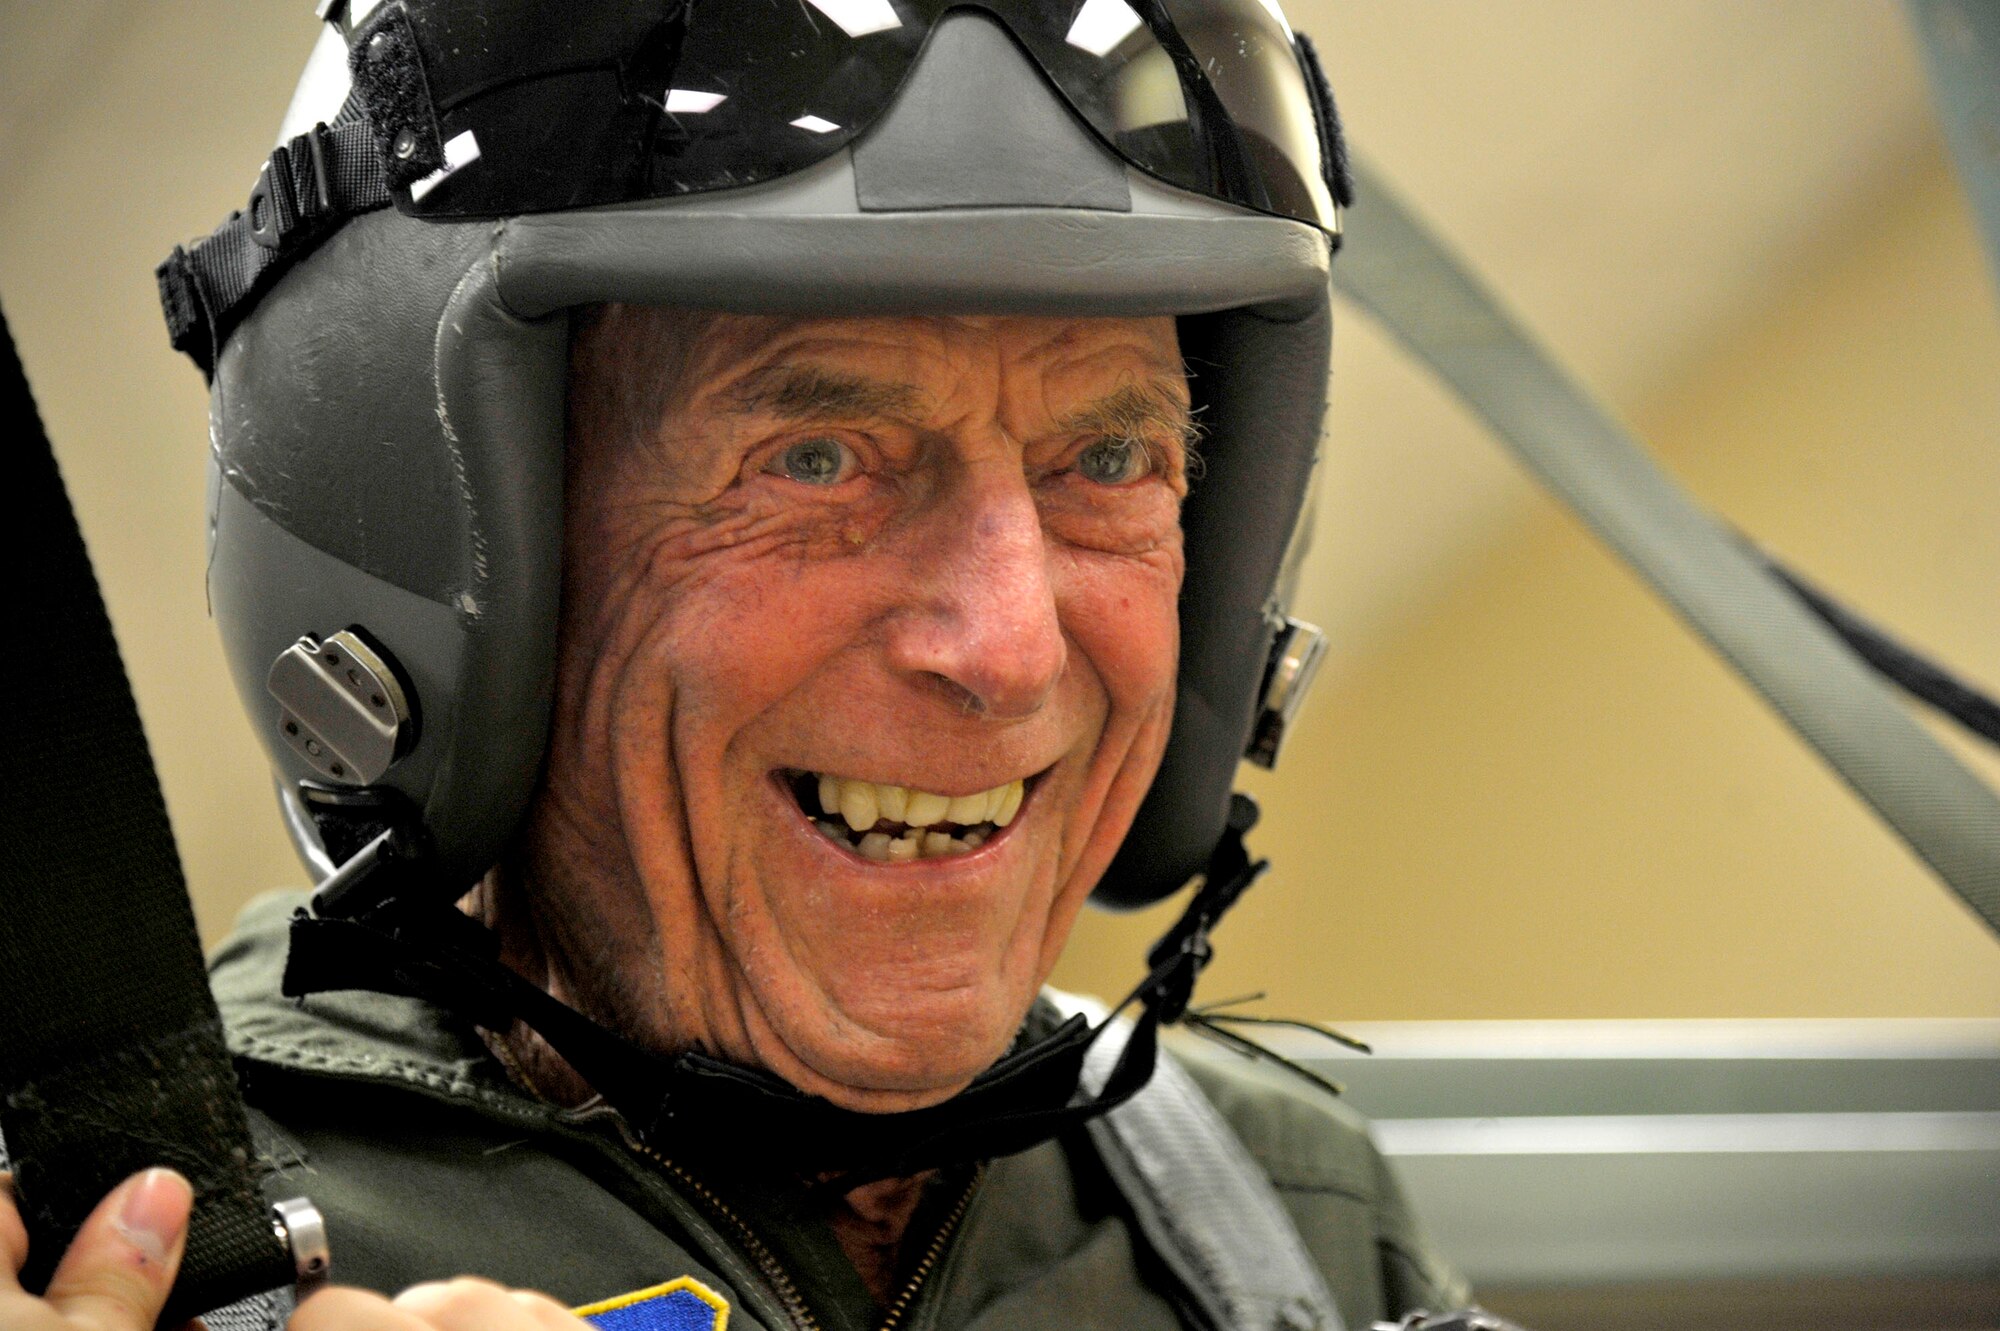 Retired Capt. Jerry Yellin, a former U.S. Army Air Corps fighter pilot, dangles in the parachute trainer during pre-flight orientation training Dec. 16, 2016, at Laughlin Air Force Base, Texas.  Now 92, he enlisted two months after the bombing of Hickam Air Field and Pearl Harbor, Hawaii, on his 18th birthday in February of 1942. After graduating from Luke Air Field as a fighter pilot in August 1943, he spent the remainder of the war flying P-40, P-47 Thunderbolt and P-51 Mustang combat missions in the Pacific with the 78th Fighter Squadron, known as the "Bushmasters." (U.S. Air Force photo/Tech. Sgt. Mike Meares)